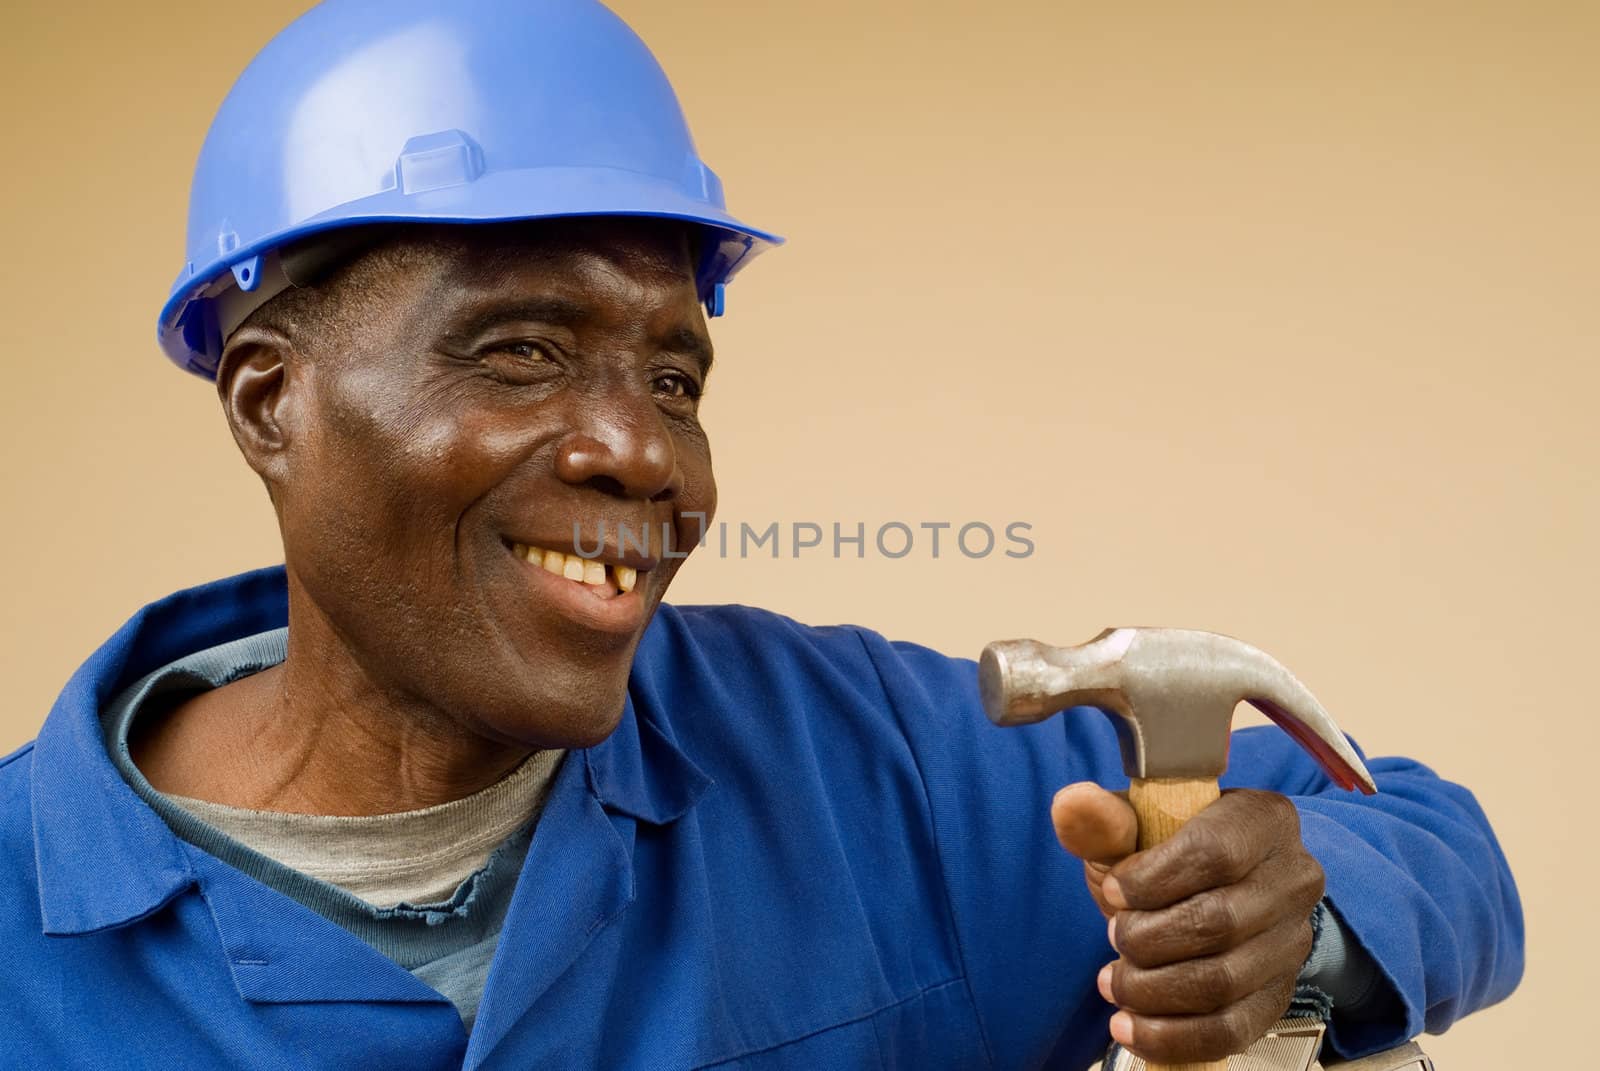 Construction Worker Holding Hammer by alistaircotton